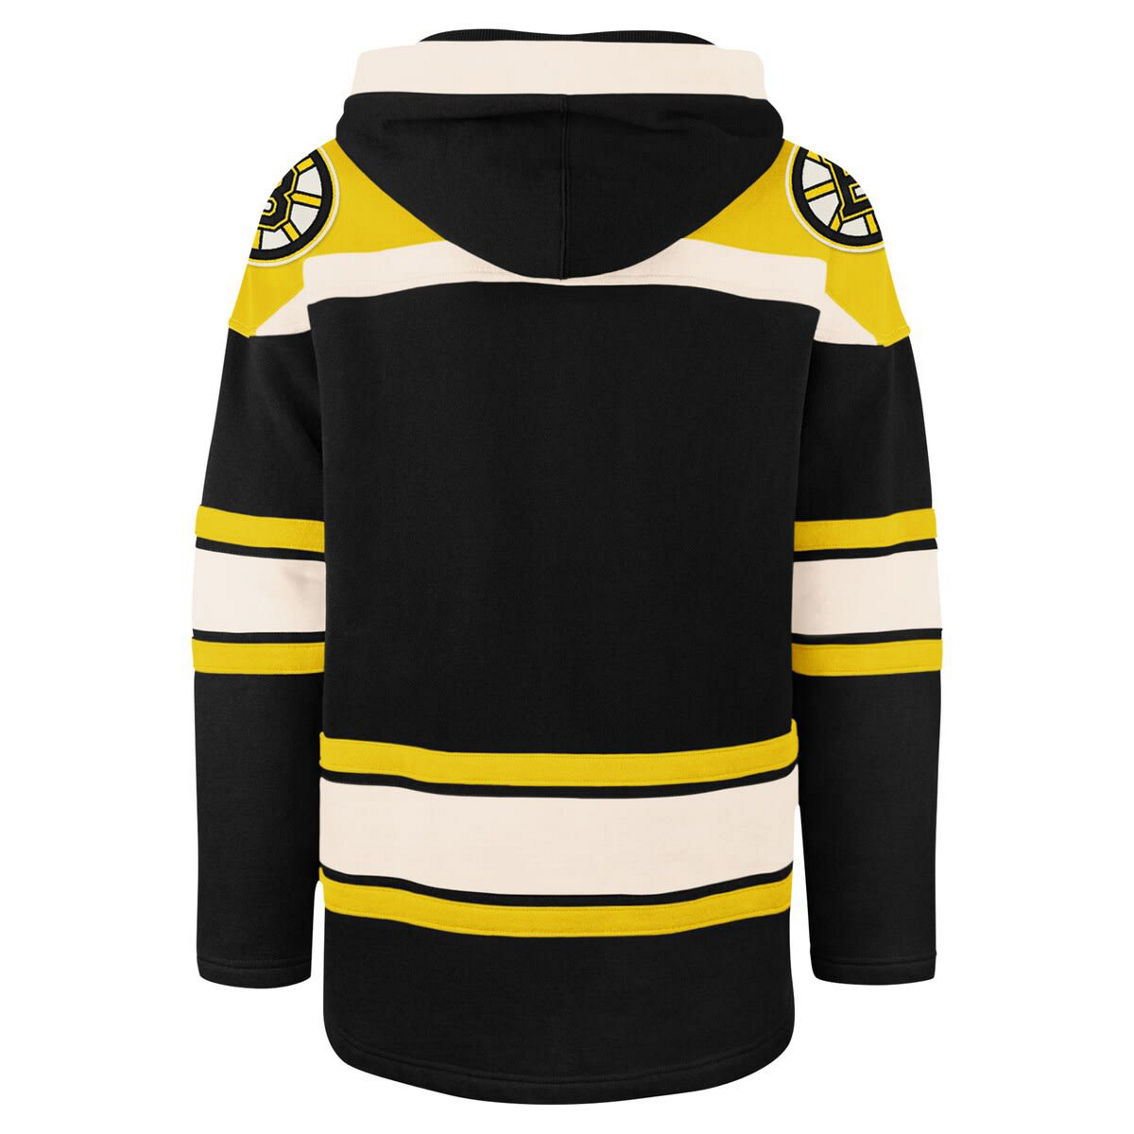 '47 Men's Black Boston Bruins 100th Anniversary Superior Lacer Pullover Hoodie - Image 4 of 4